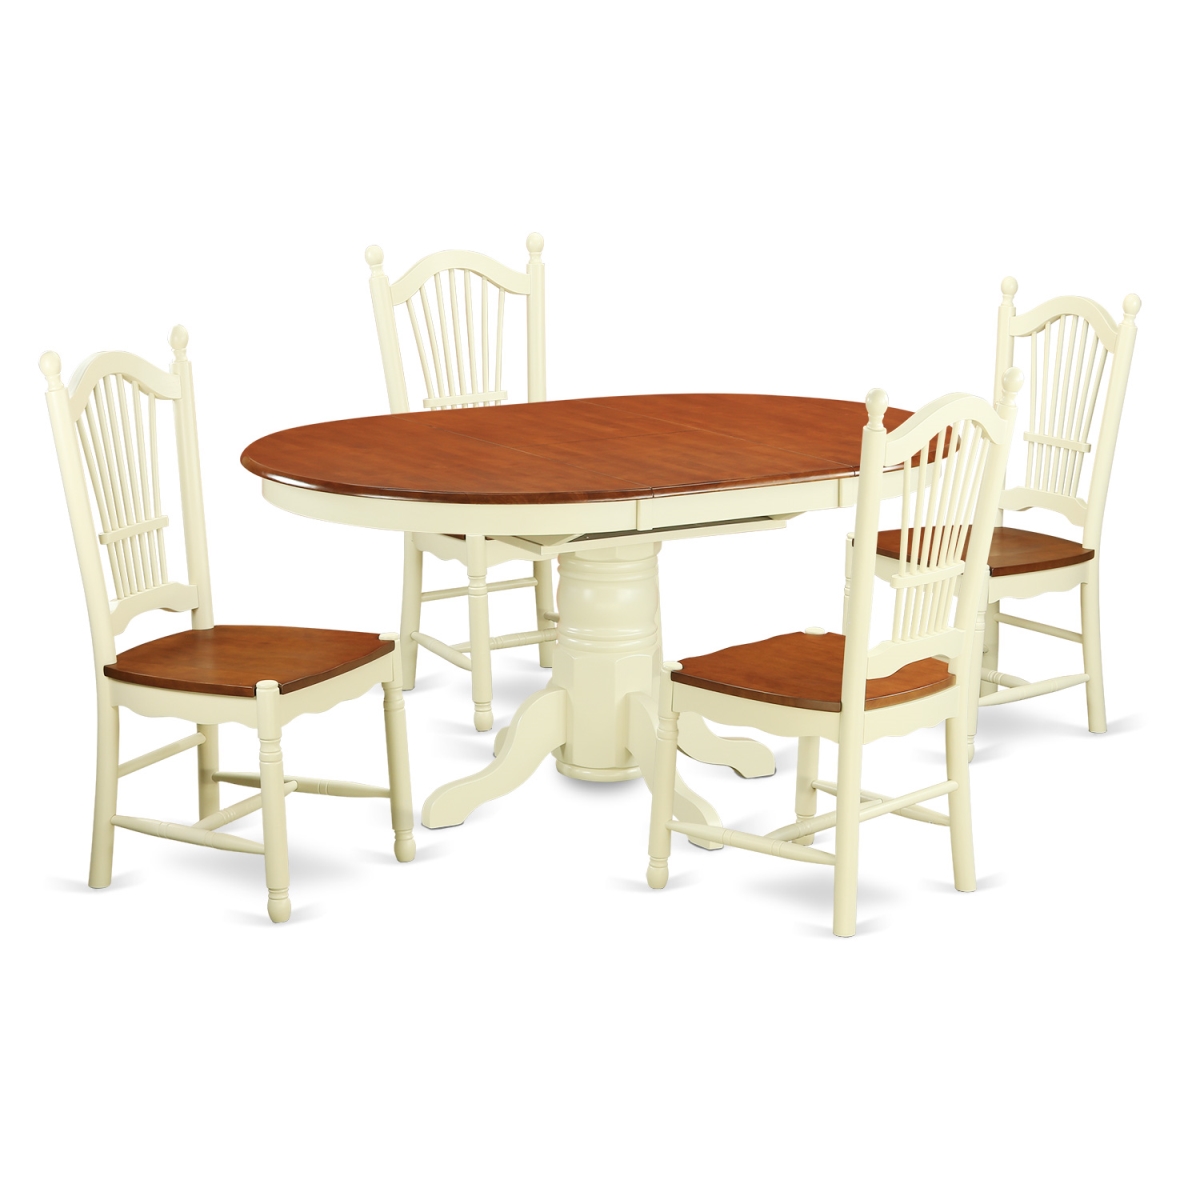 AVDO5-WHI-W Dining Room Table Set - Kitchen Table & 4 Chairs, Buttermilk & Cherry - 5 Piece -  East West Furniture